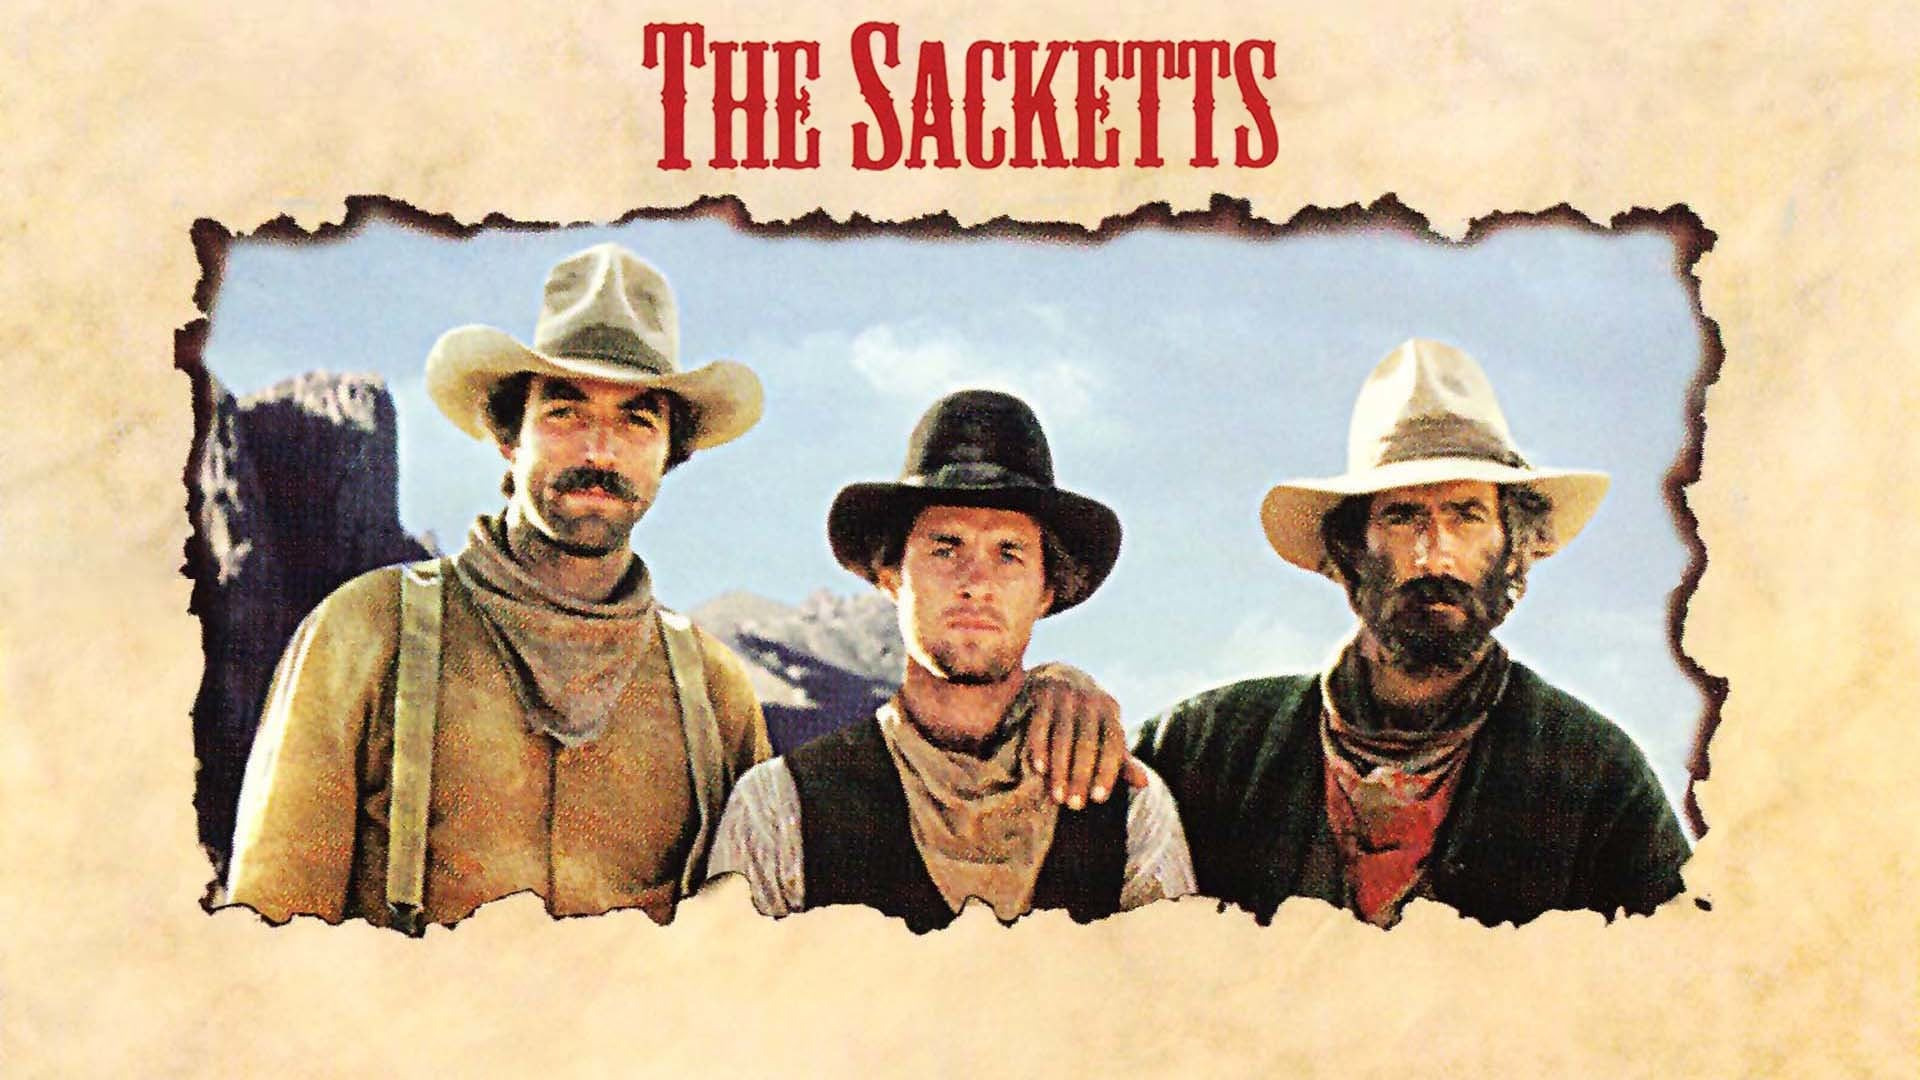 Show The Sacketts